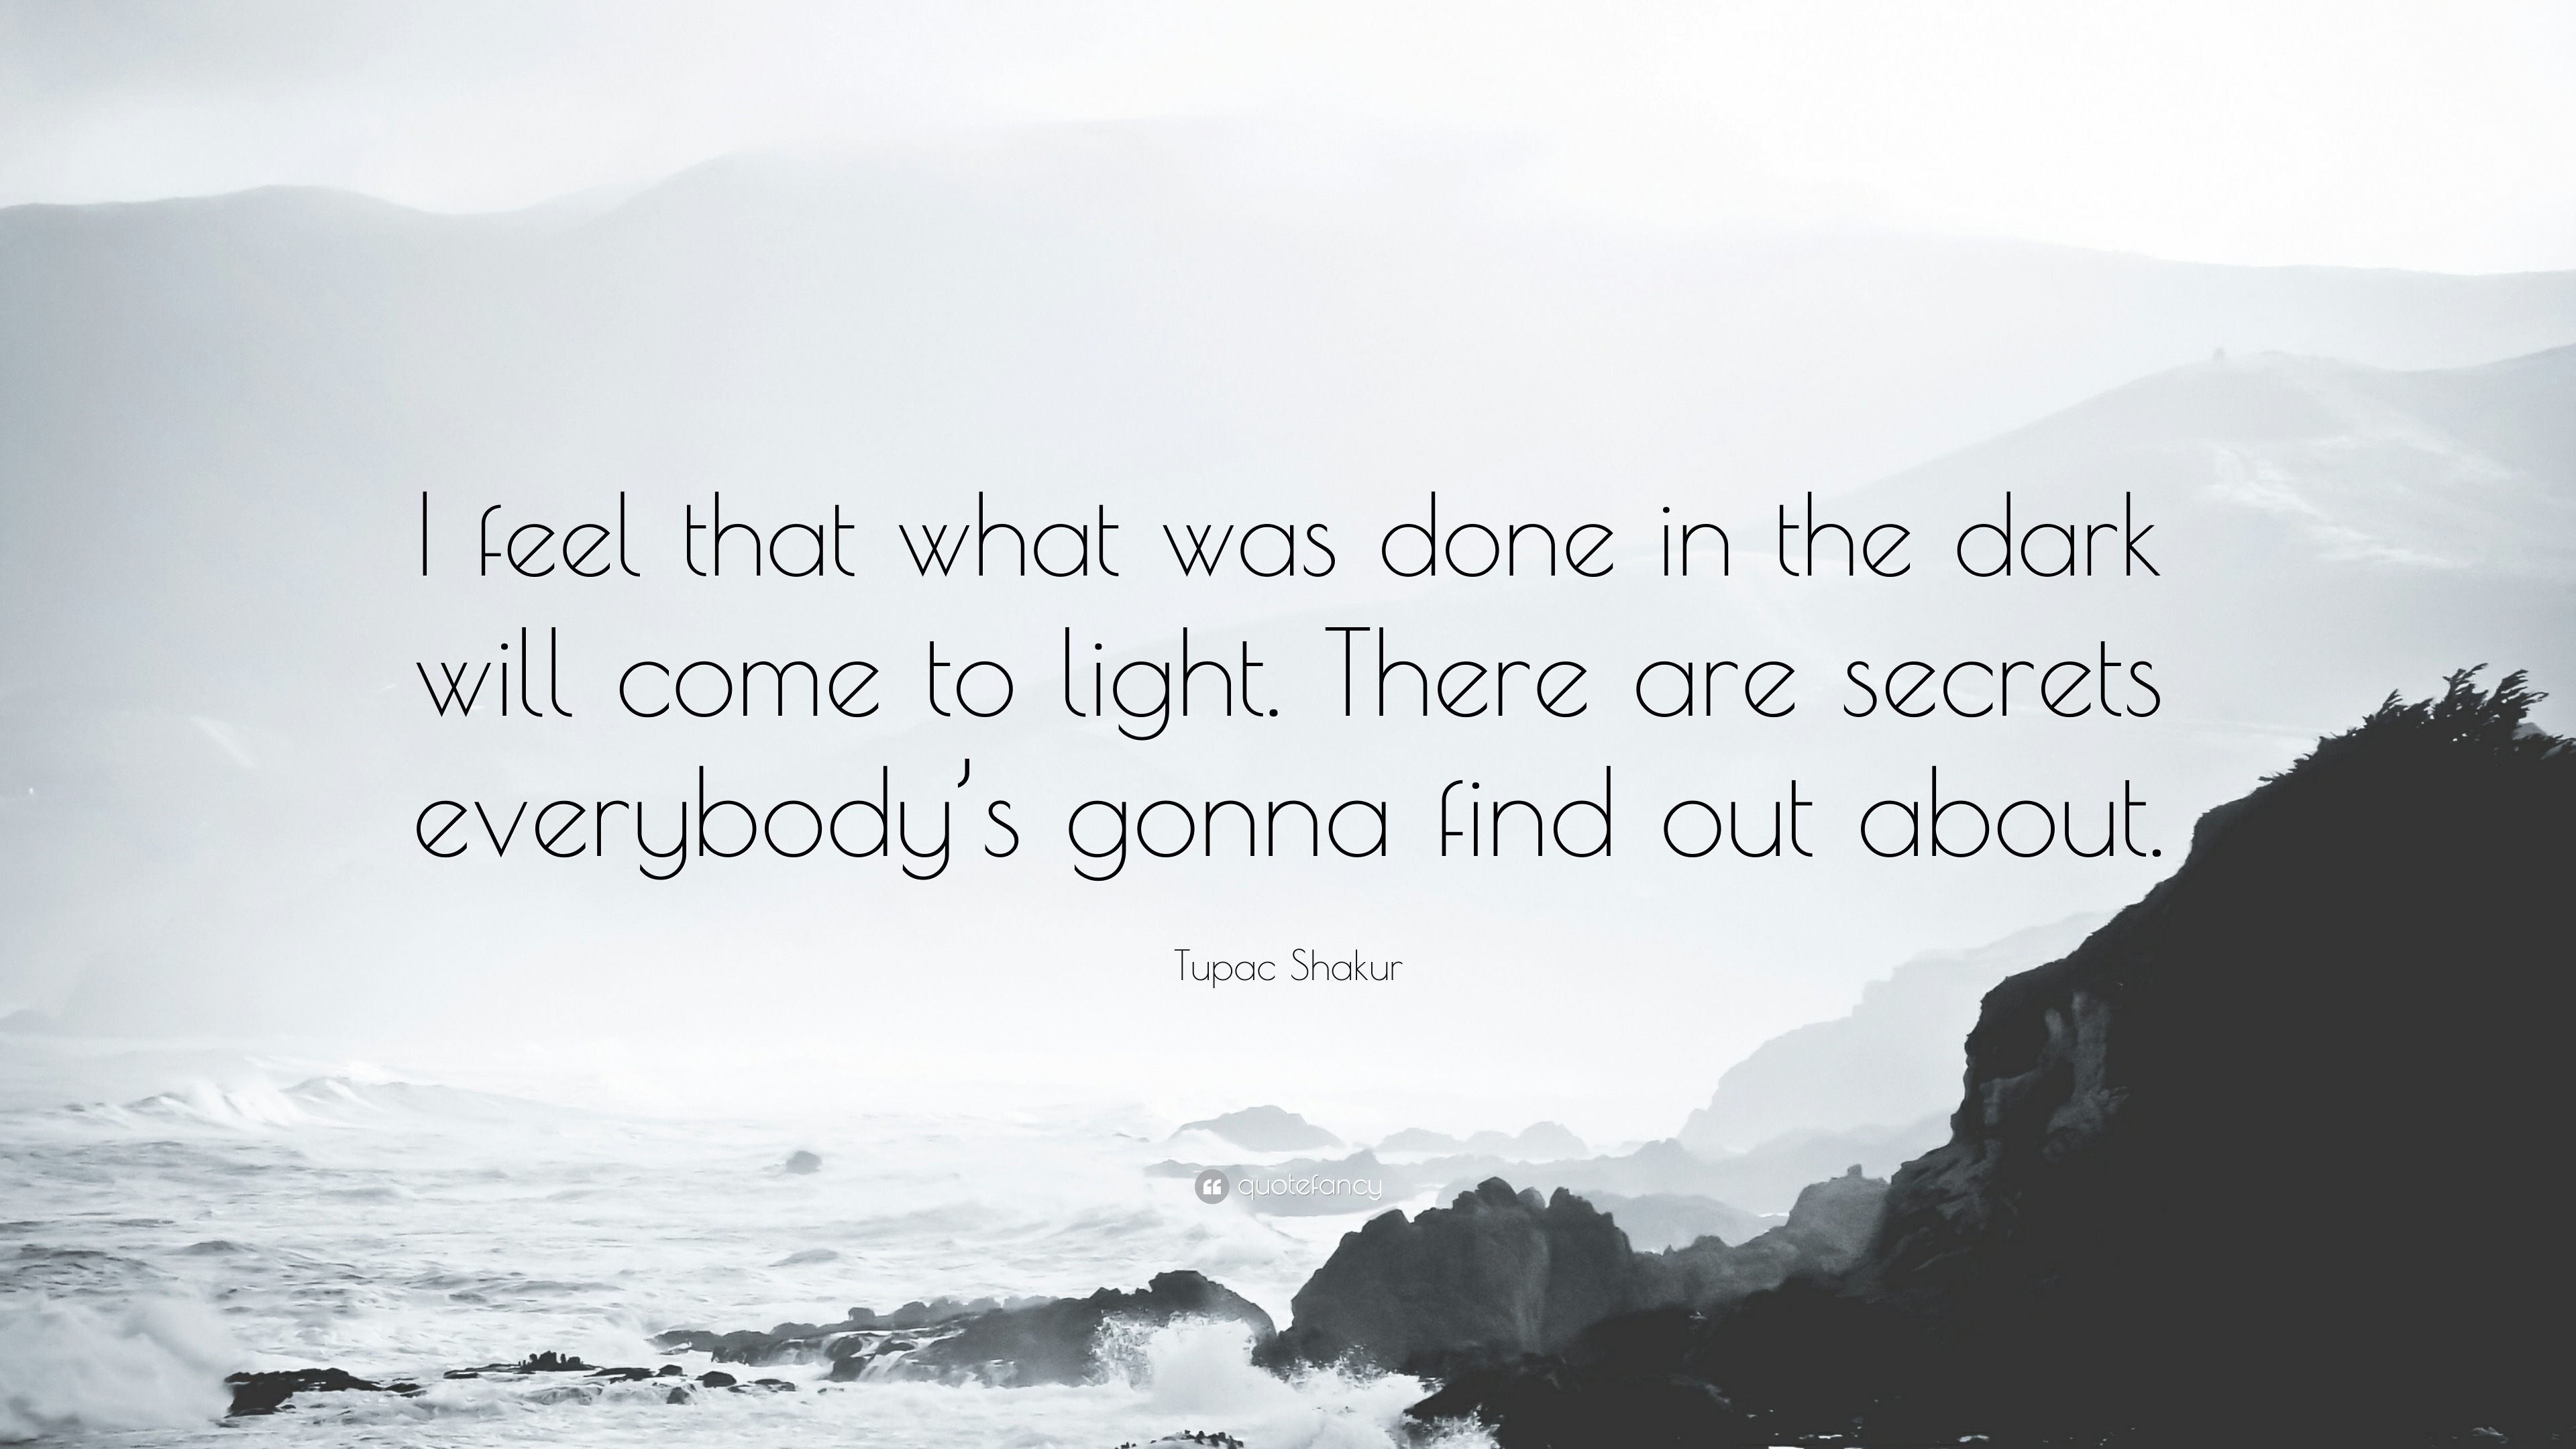 Tupac Shakur Quote: “I Feel That What Was Done In The Dark Will Come To Light.